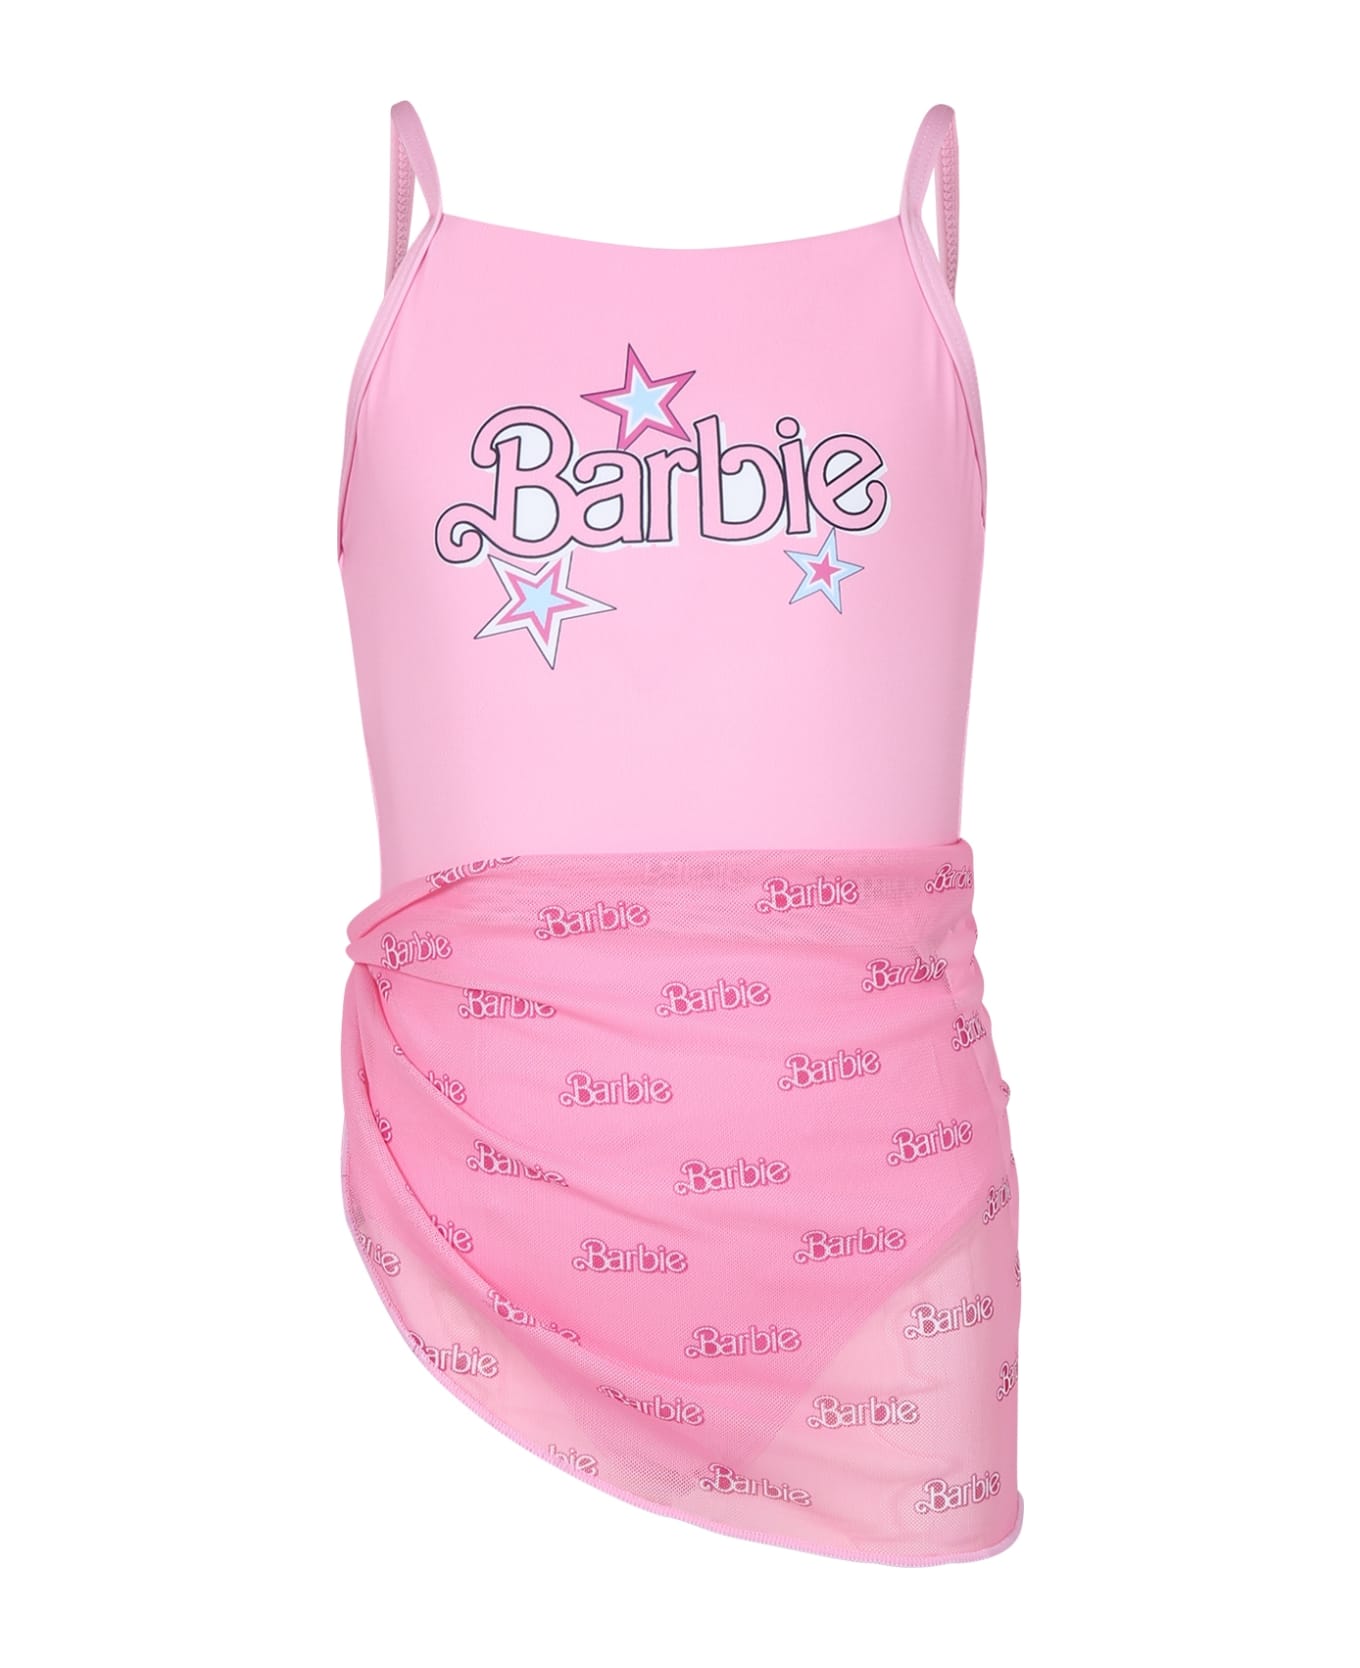 Monnalisa Pink Suit For Girl With Barbie Writing - Pink